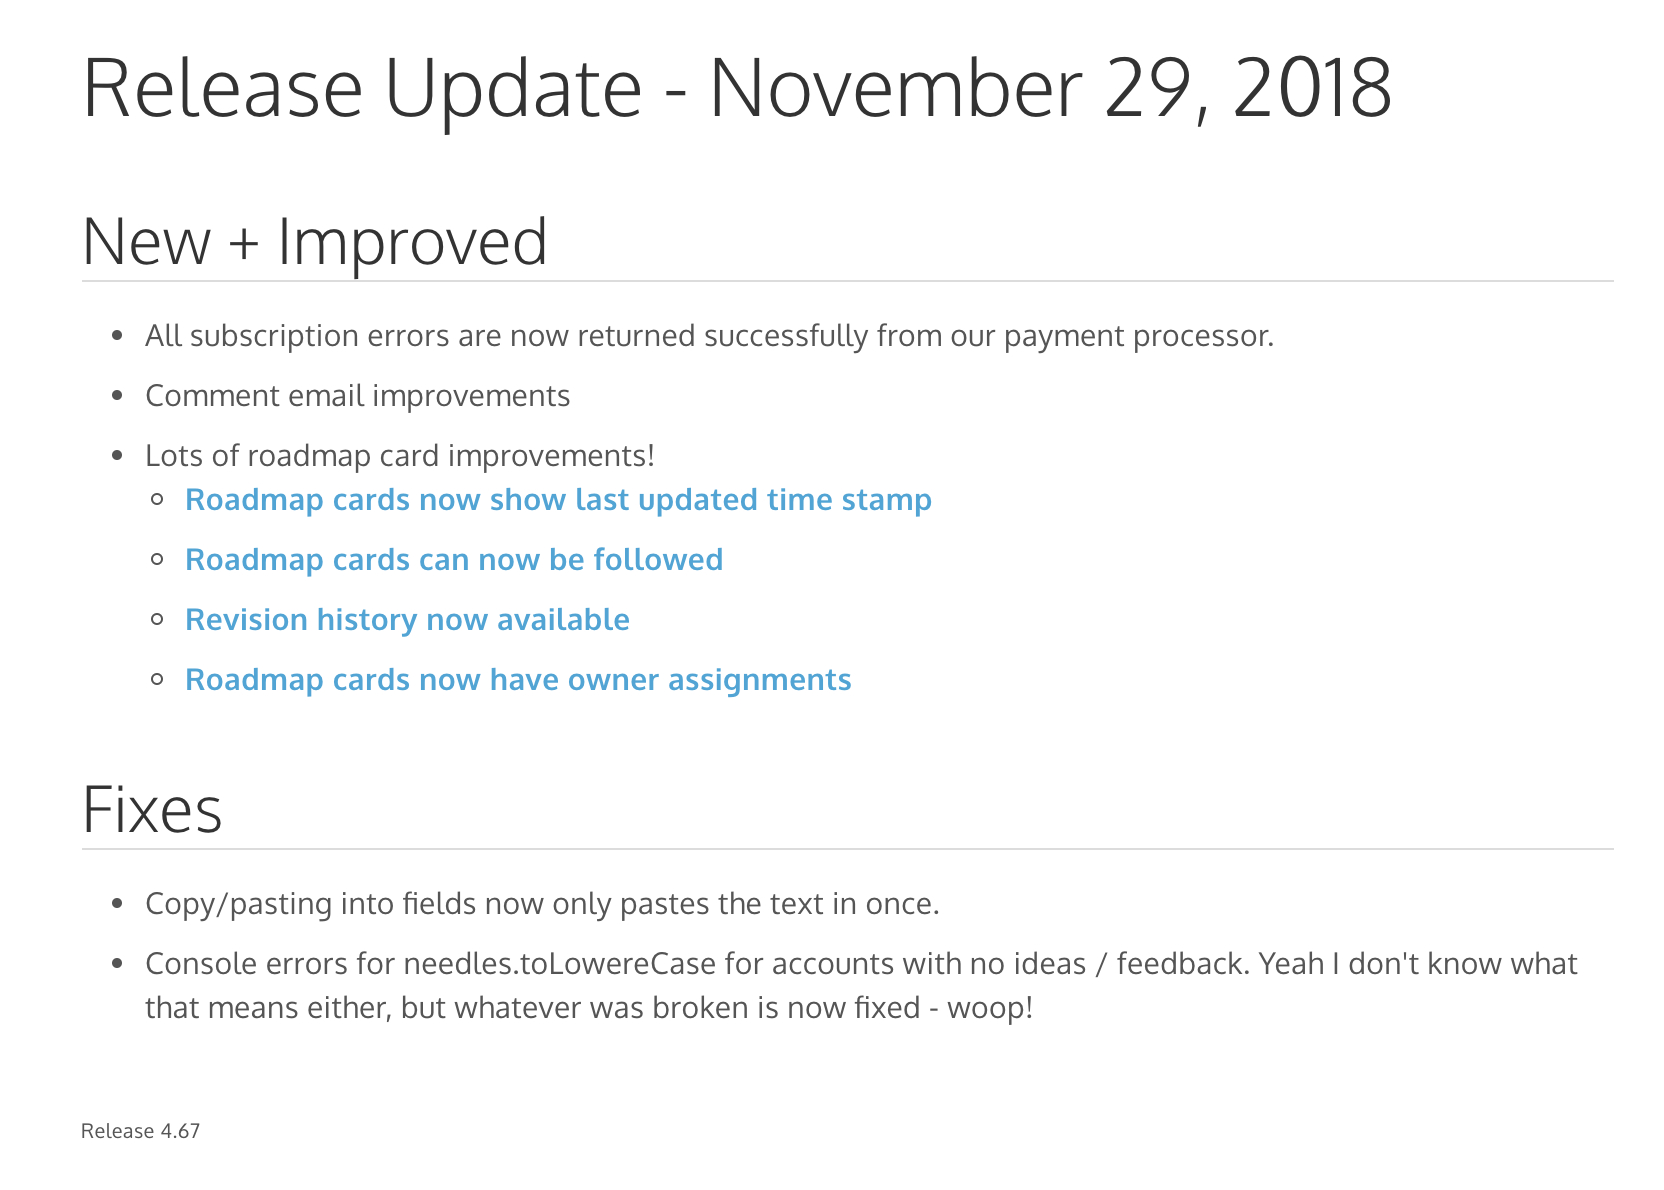 How To Write Great Release Notes | Prodpad With Regard To Software Release Notes Template Word